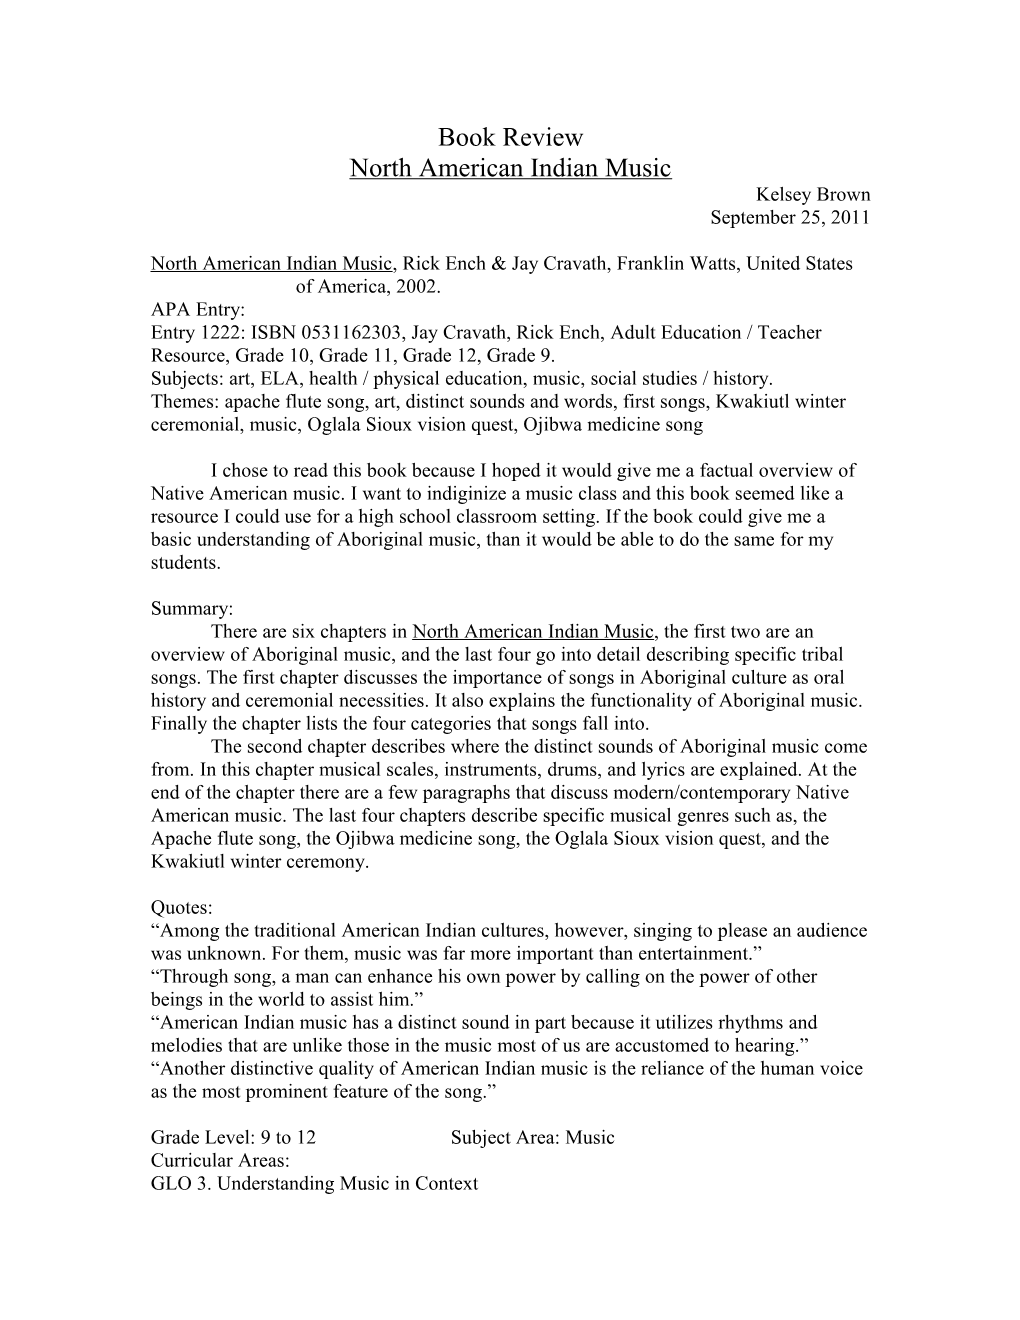 North American Indian Music